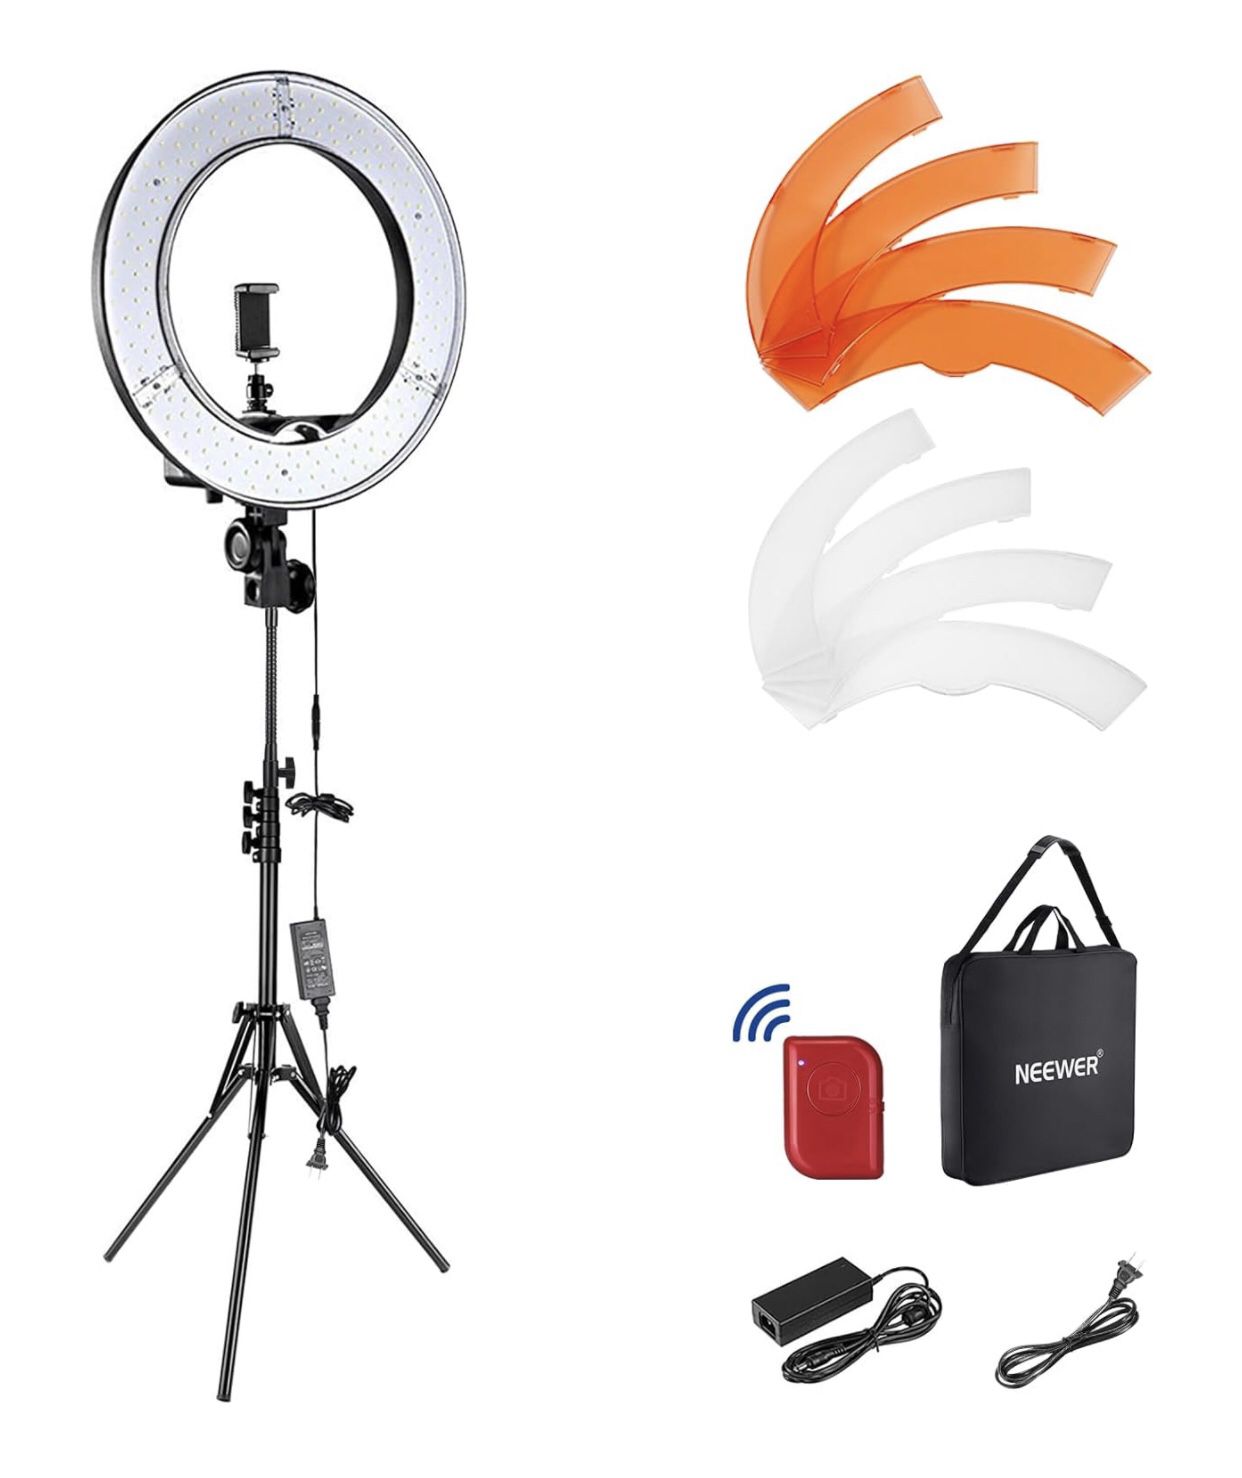 NEW! NEEWER Ring Light 18inch Kit: 55W 5600K Professional LED with Stand and Phone Holder, Soft Tube